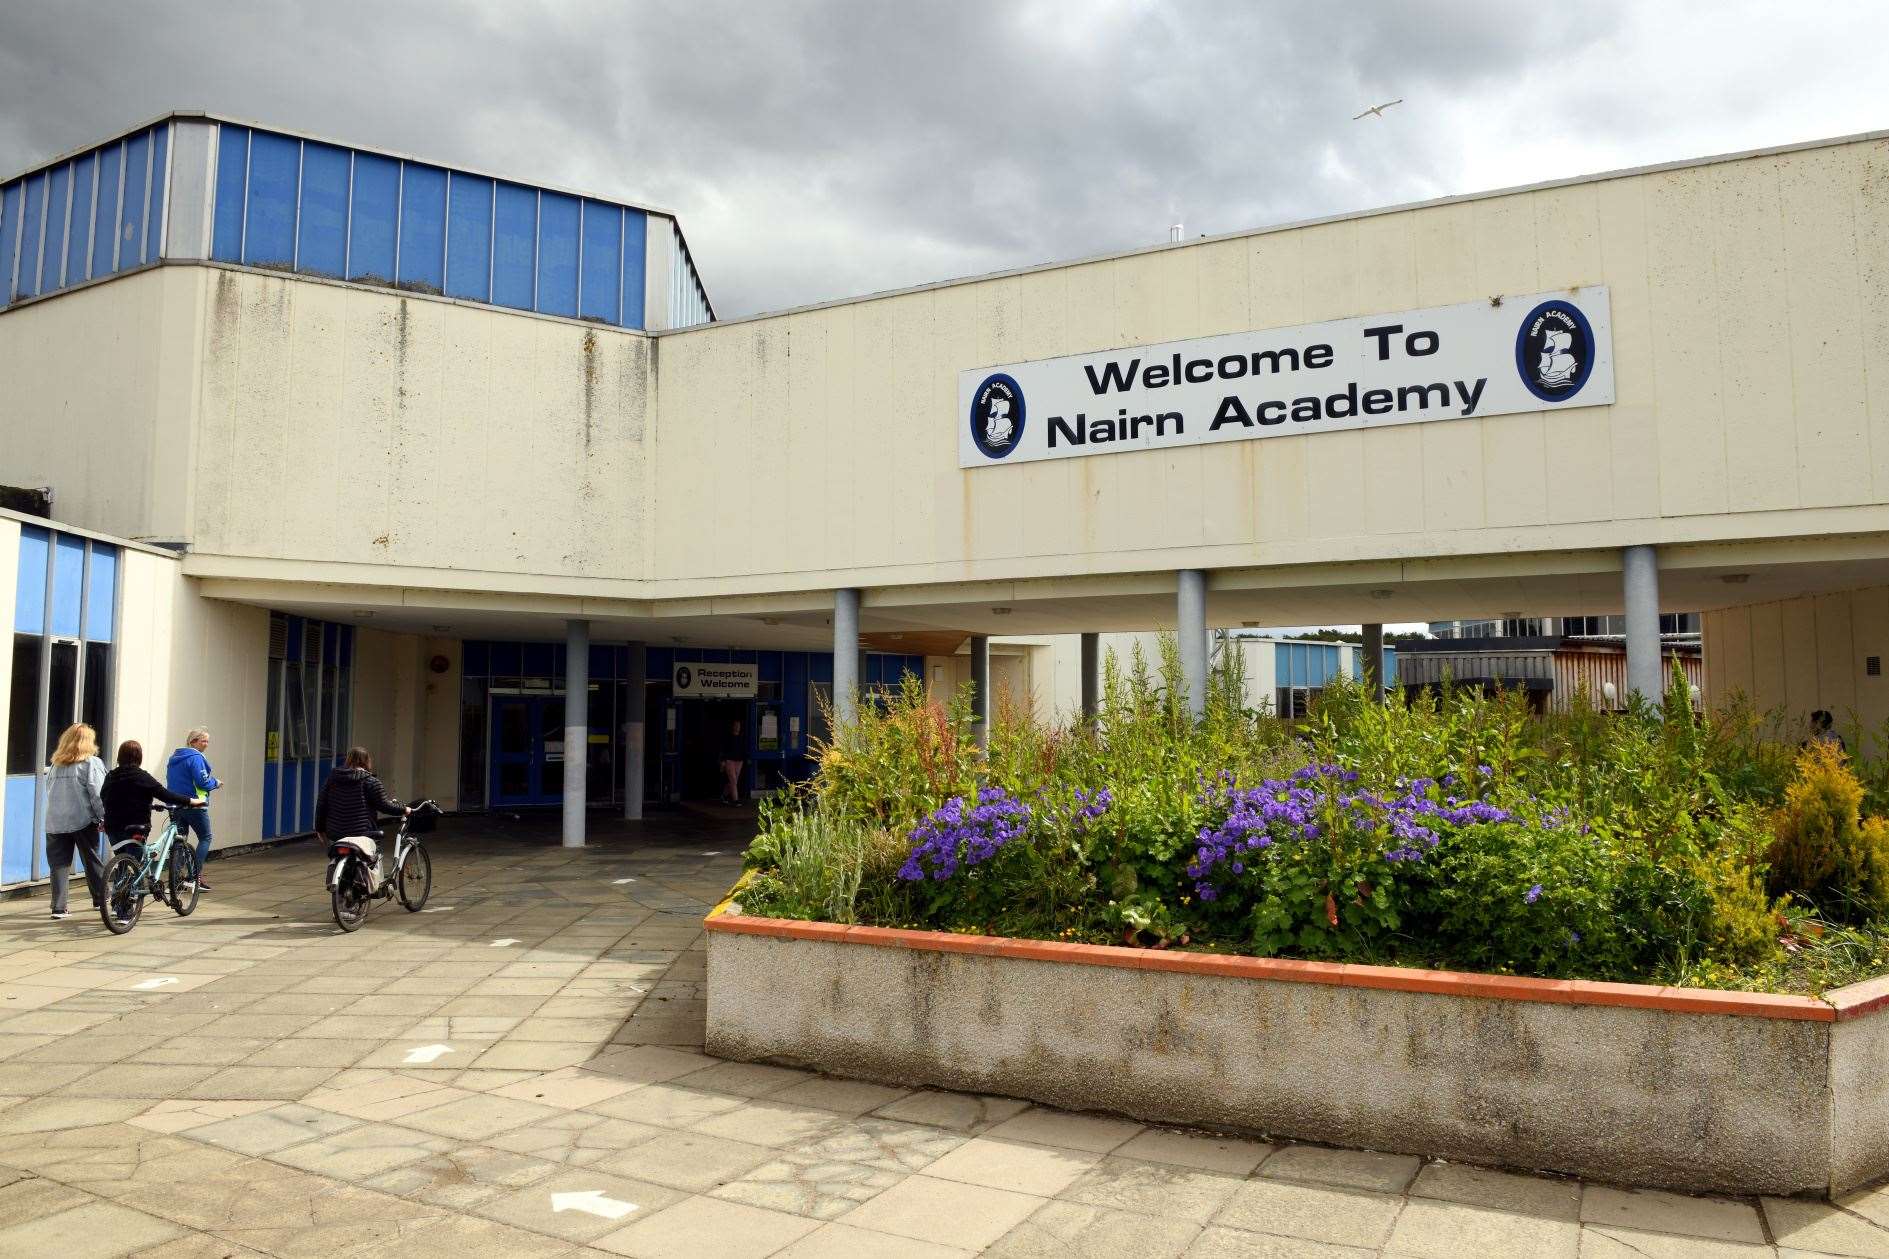 A consultation is taking place on plans for a new Nairn Academy.